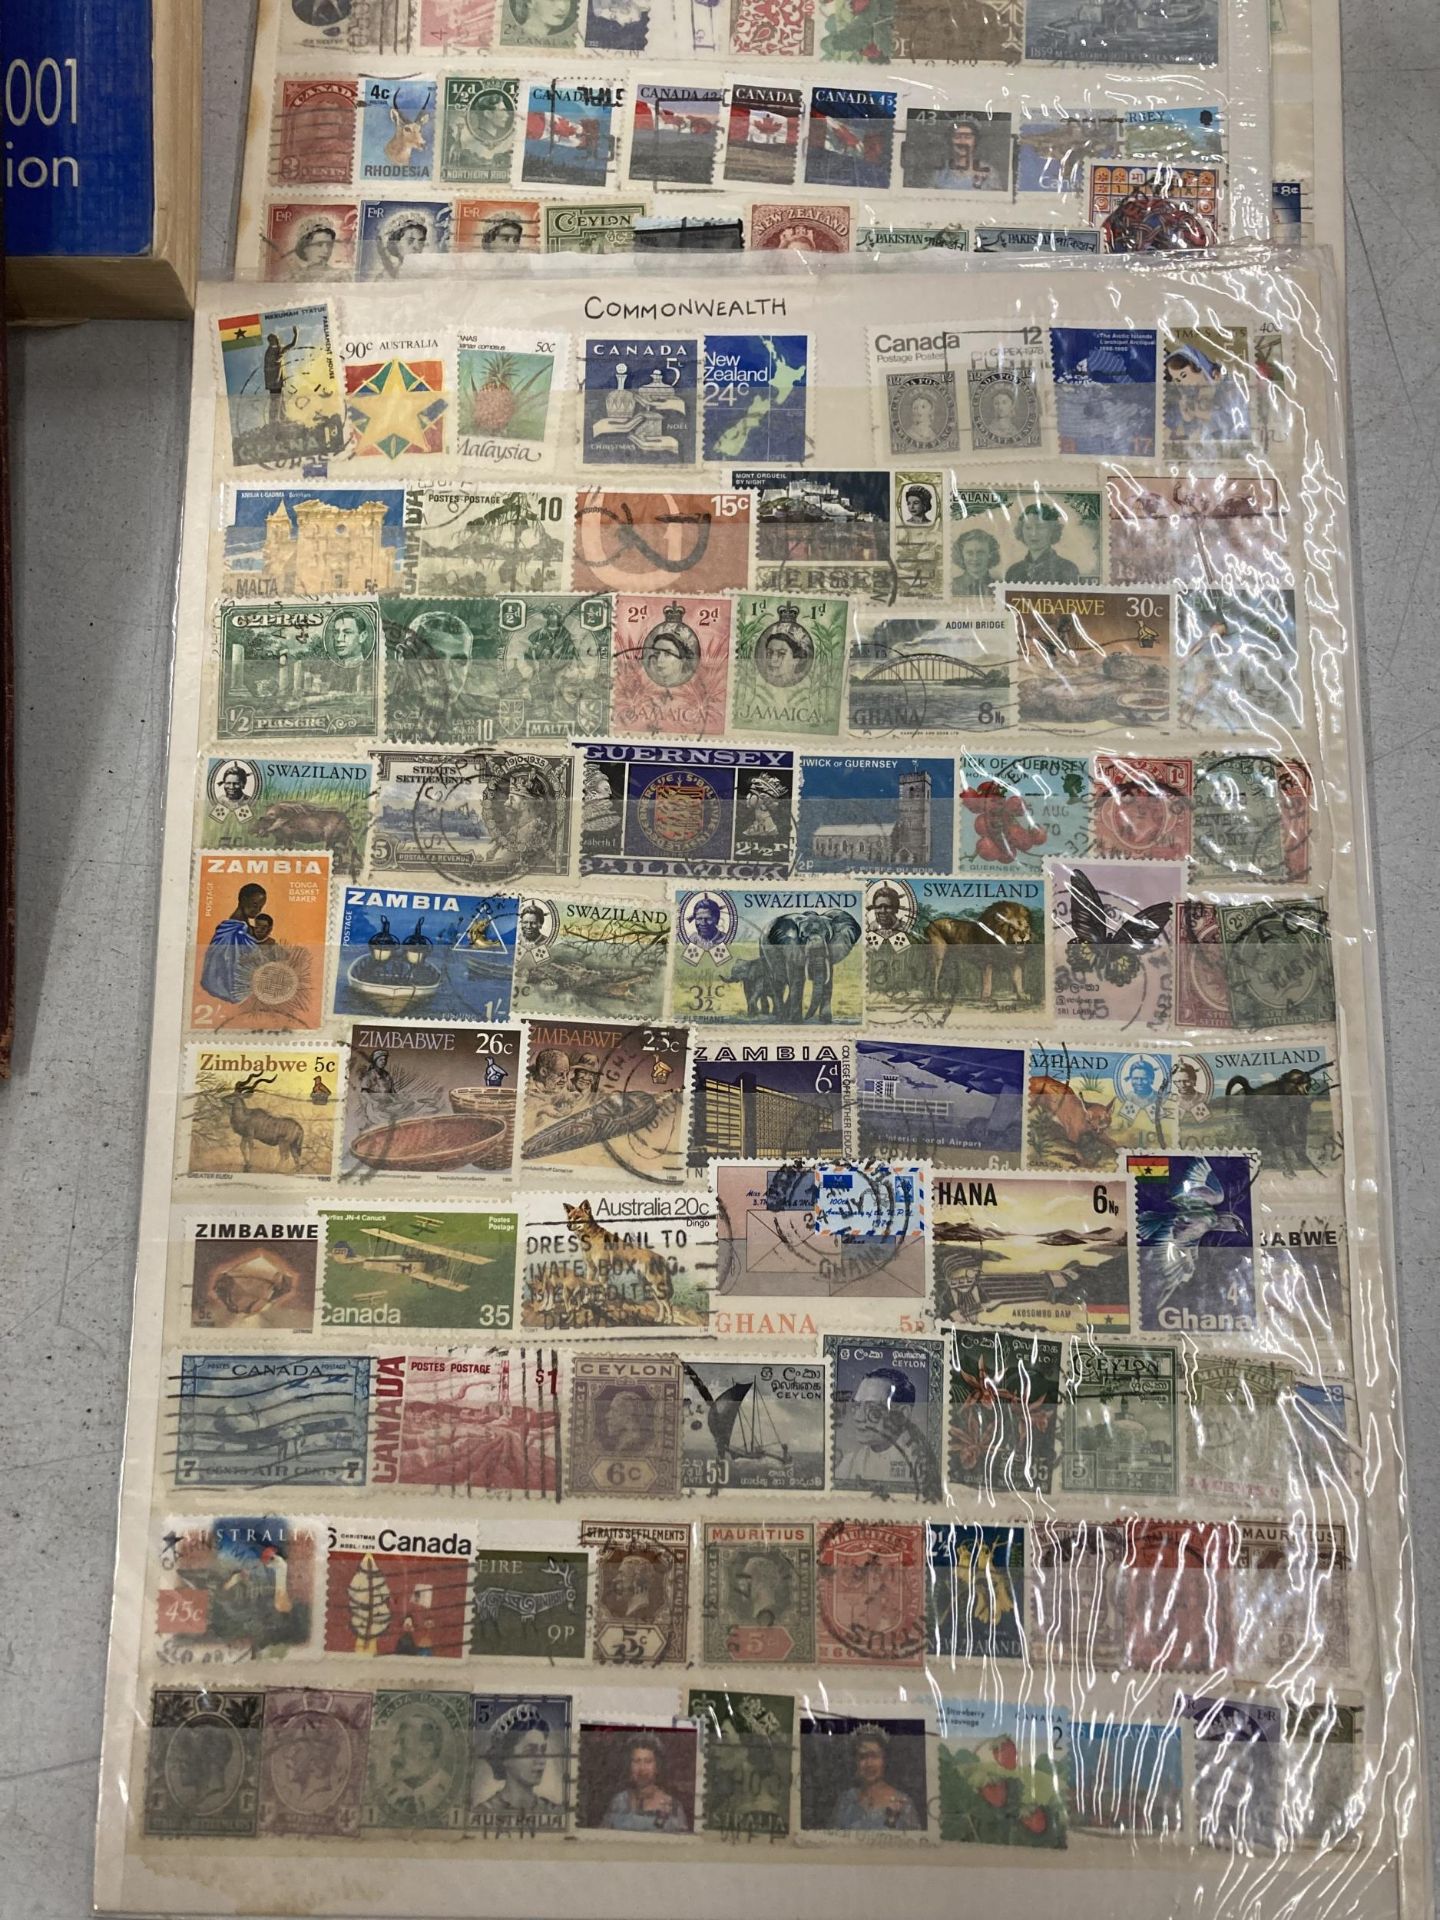 A COLLECTION OF STAMPS, COMMENWEALTH EXAMPLES ON SHEETS, WORLD POSTAGE ALBUM, STANLEY GIBBONS - Image 3 of 8